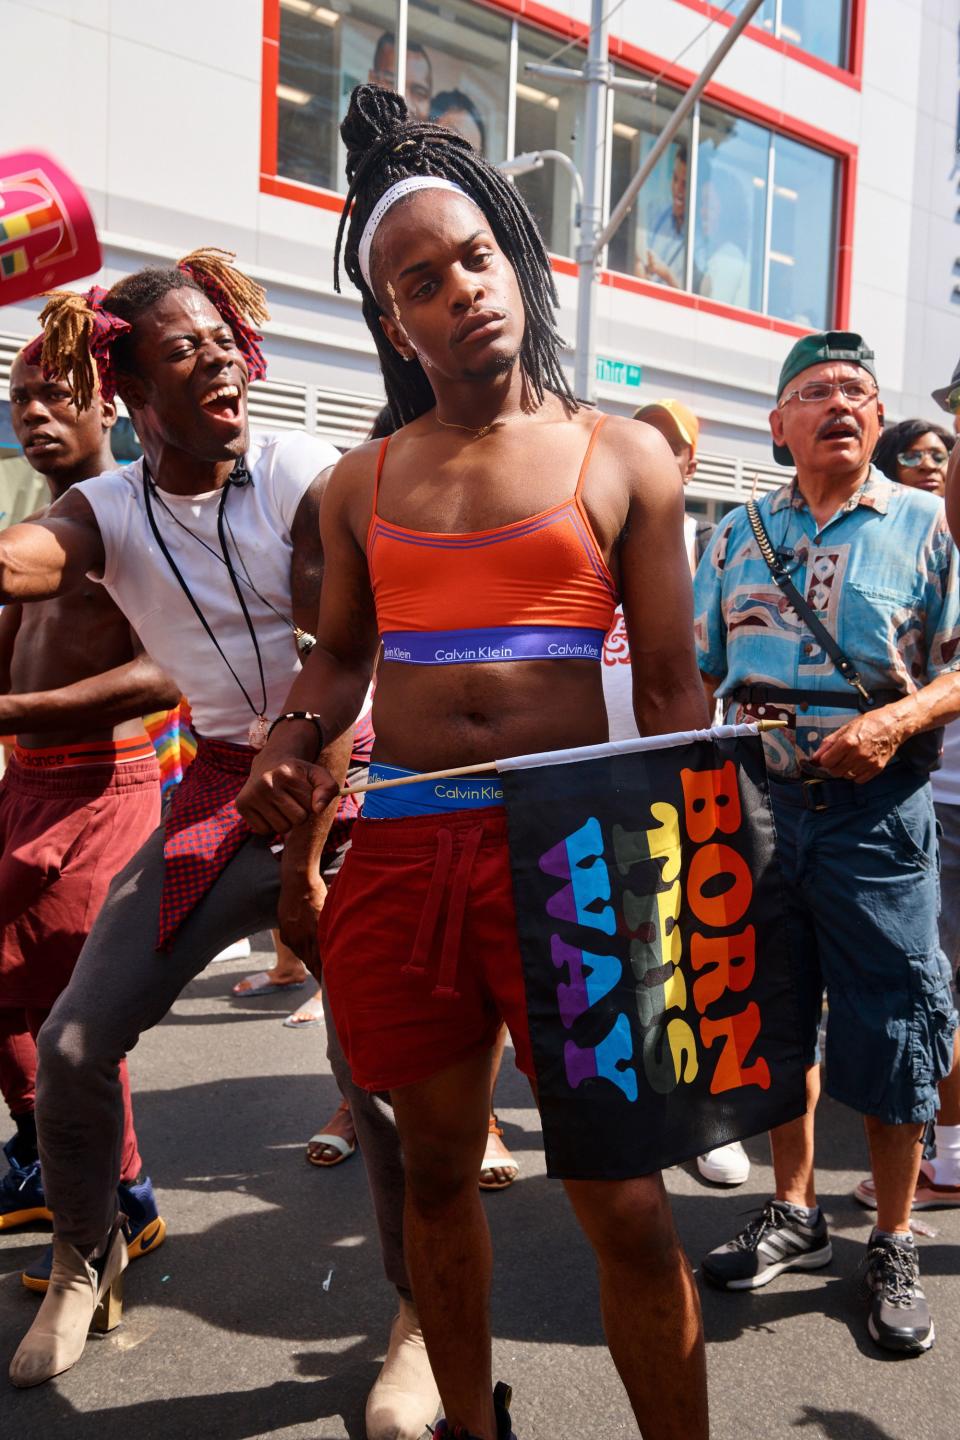 The second annual 1 Bronx Pride festival occurred on a hot summer day in New York’s northernmost borough; photographed here by Devin Doyle.